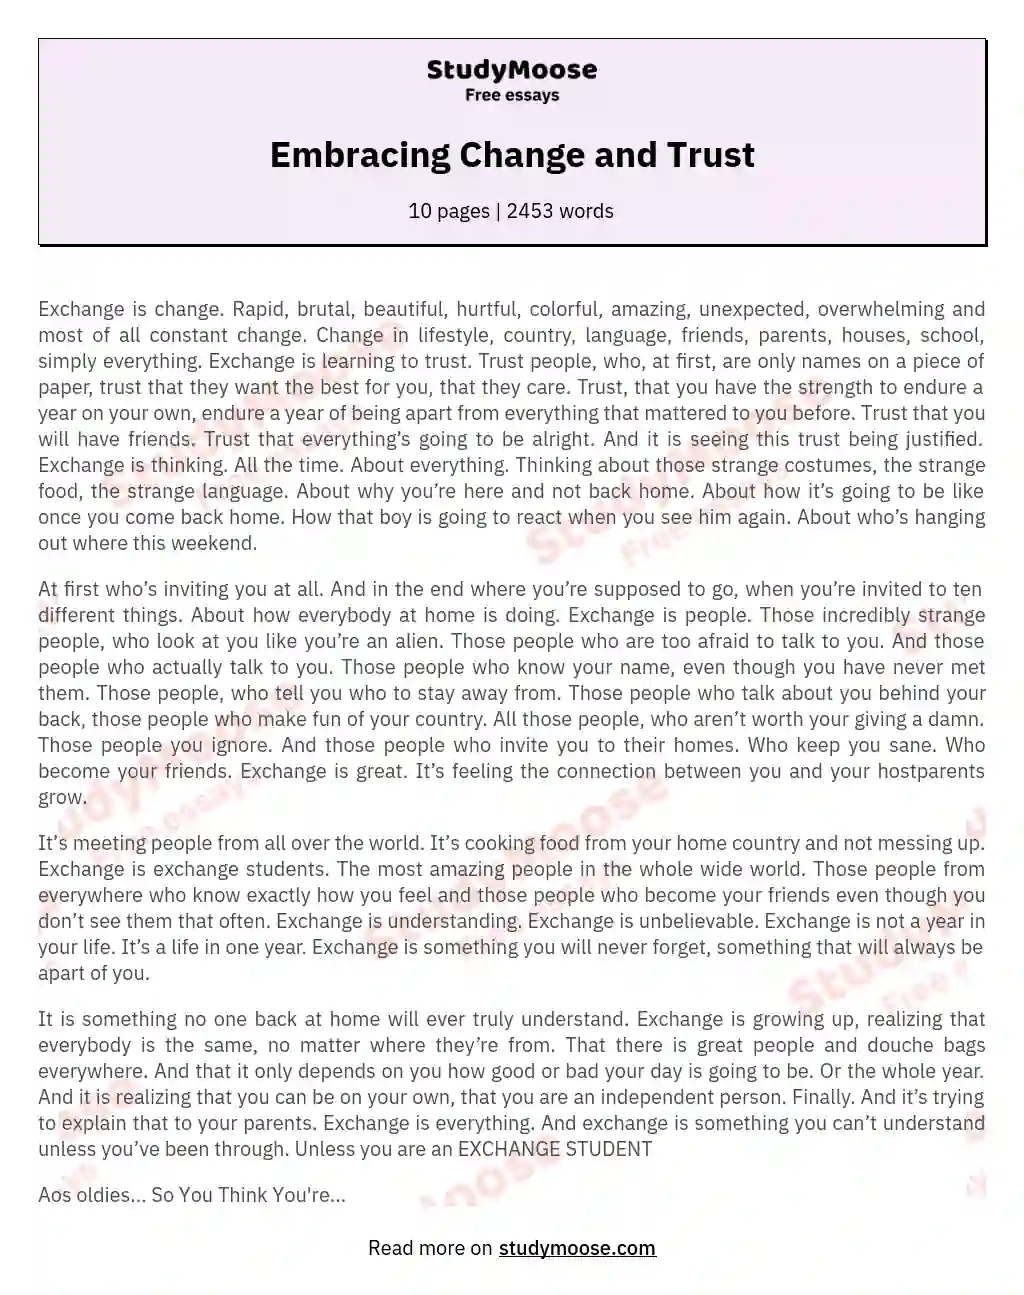 Embracing Change and Trust essay